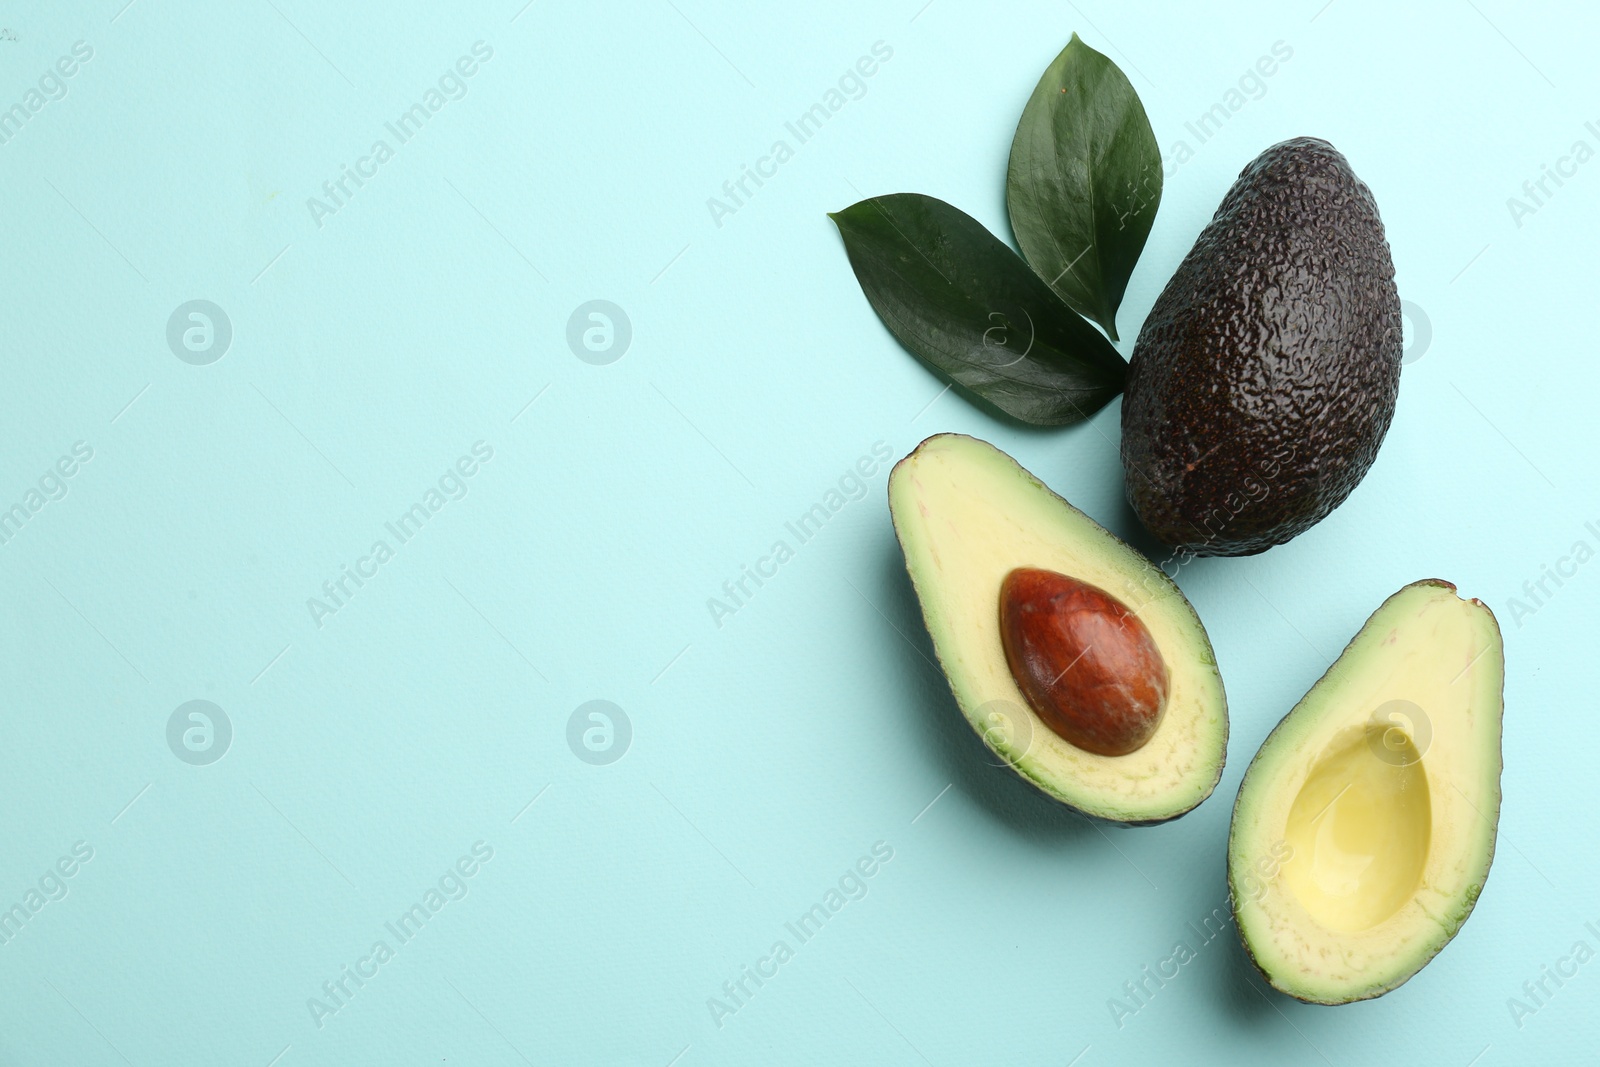 Photo of Whole and cut ripe avocadoes with green leaves on light blue background, flat lay. Space for text